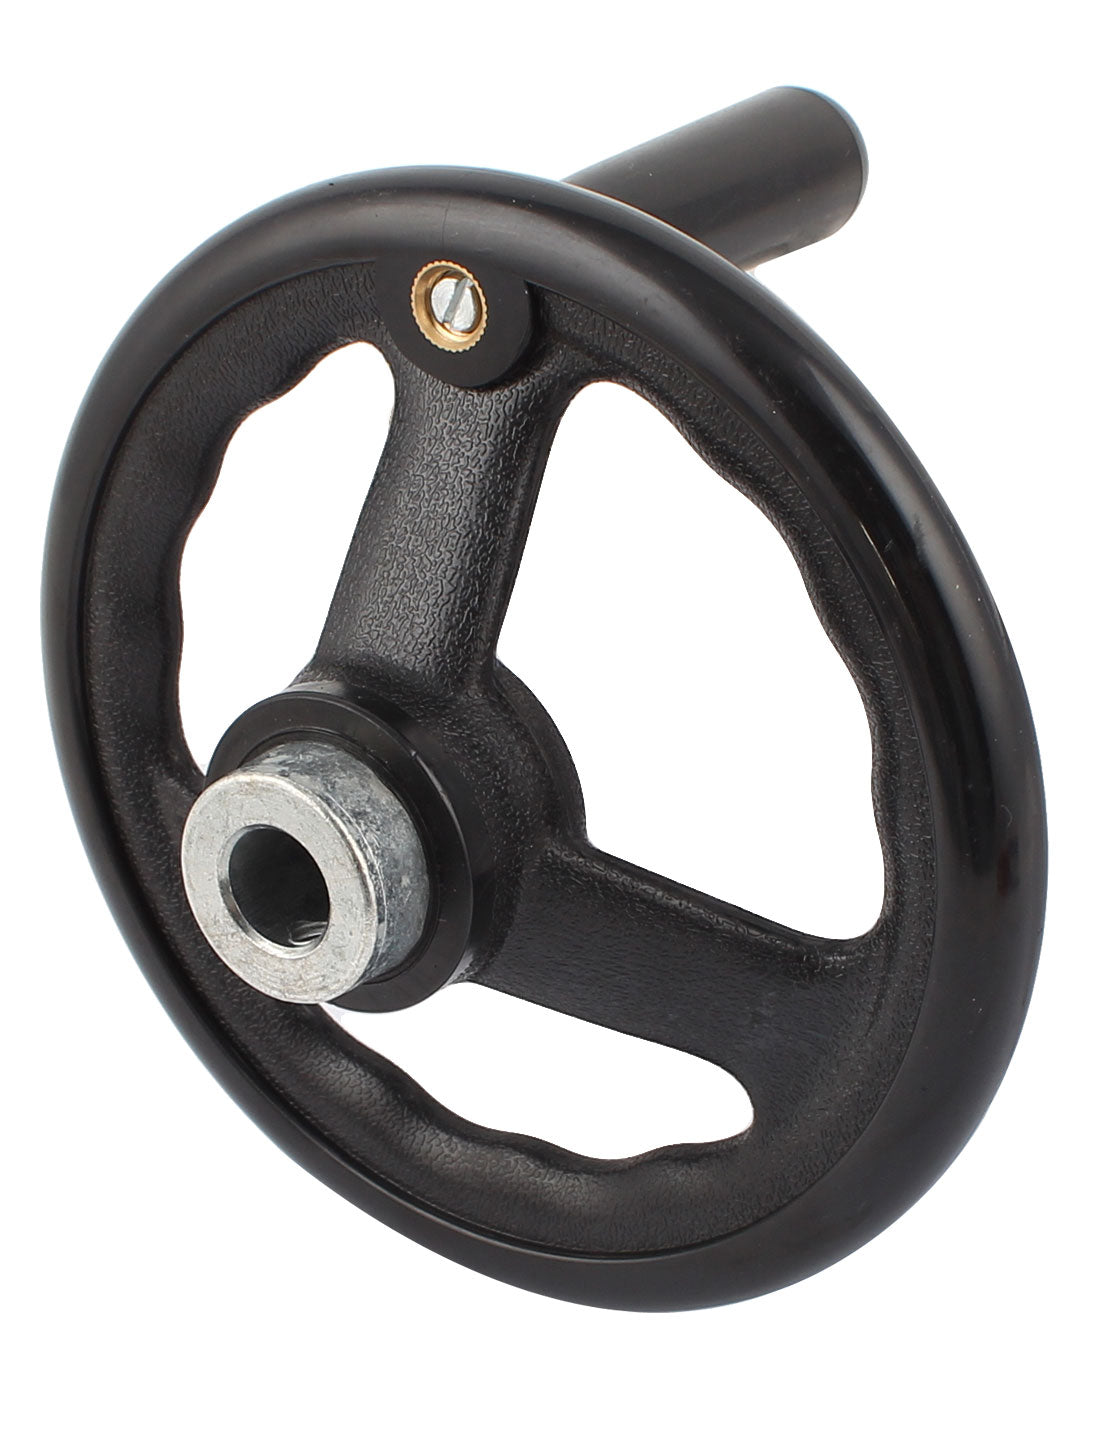 uxcell Uxcell 16mmx160mm 3 Spoke Hand Wheel Black w Revolving Handle for Industrial Lathe